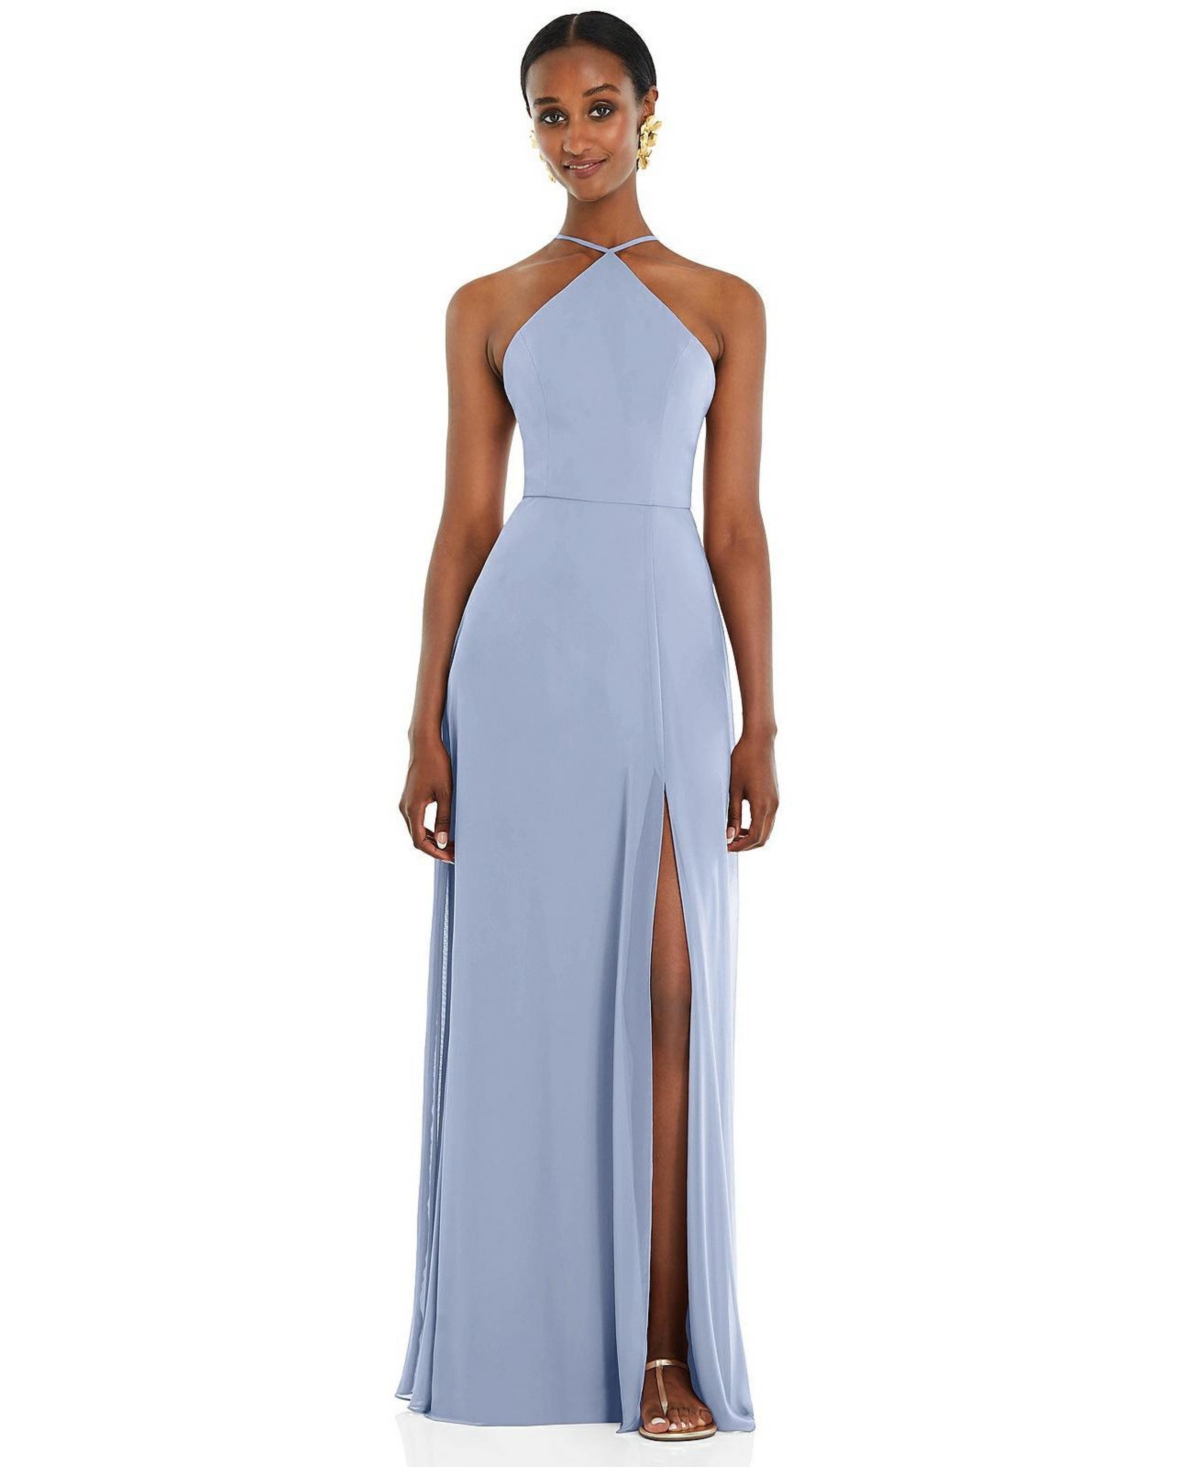 LOVELY WOMENS DIAMOND HALTER MAXI DRESS WITH ADJUSTABLE STRAPS